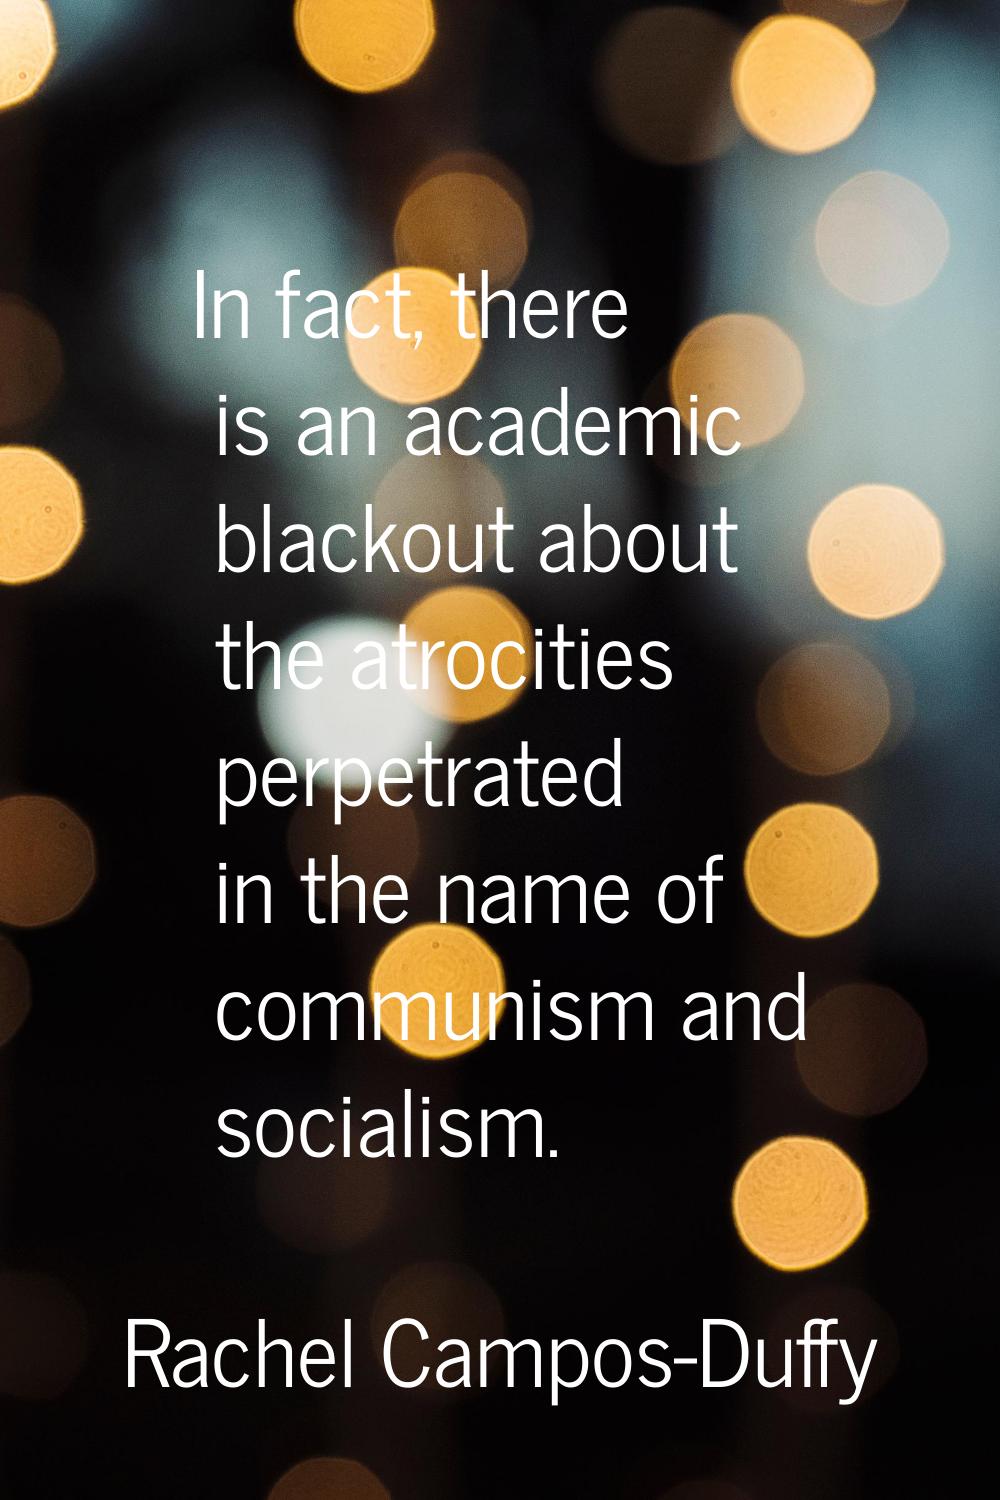 In fact, there is an academic blackout about the atrocities perpetrated in the name of communism an